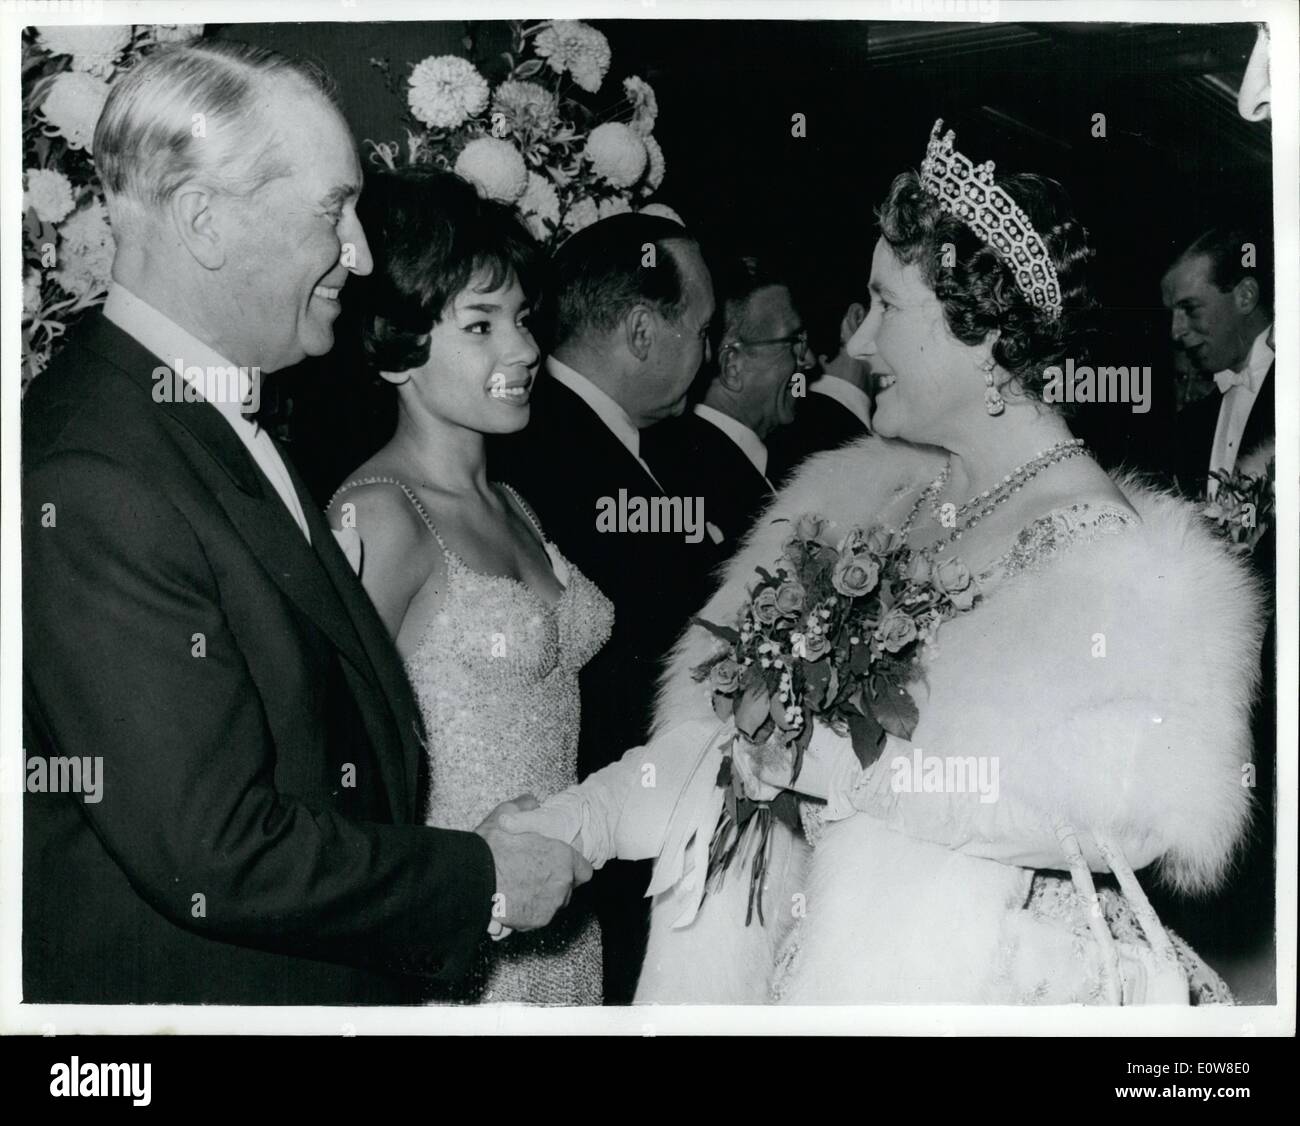 Nov. 11, 1961 - Royal variety performance held in London last night. Following the Royal Variety Performance held at the Prince of Wales Theatre, London, last night, members of the Royal Family met a number of the stars backstage. Photo Shows: H.R.H. the Queen Mother shaking hands with veteran French star Maurice Chevalier after the show, singer Shirley Bassey is also seen in the photo. Stock Photo